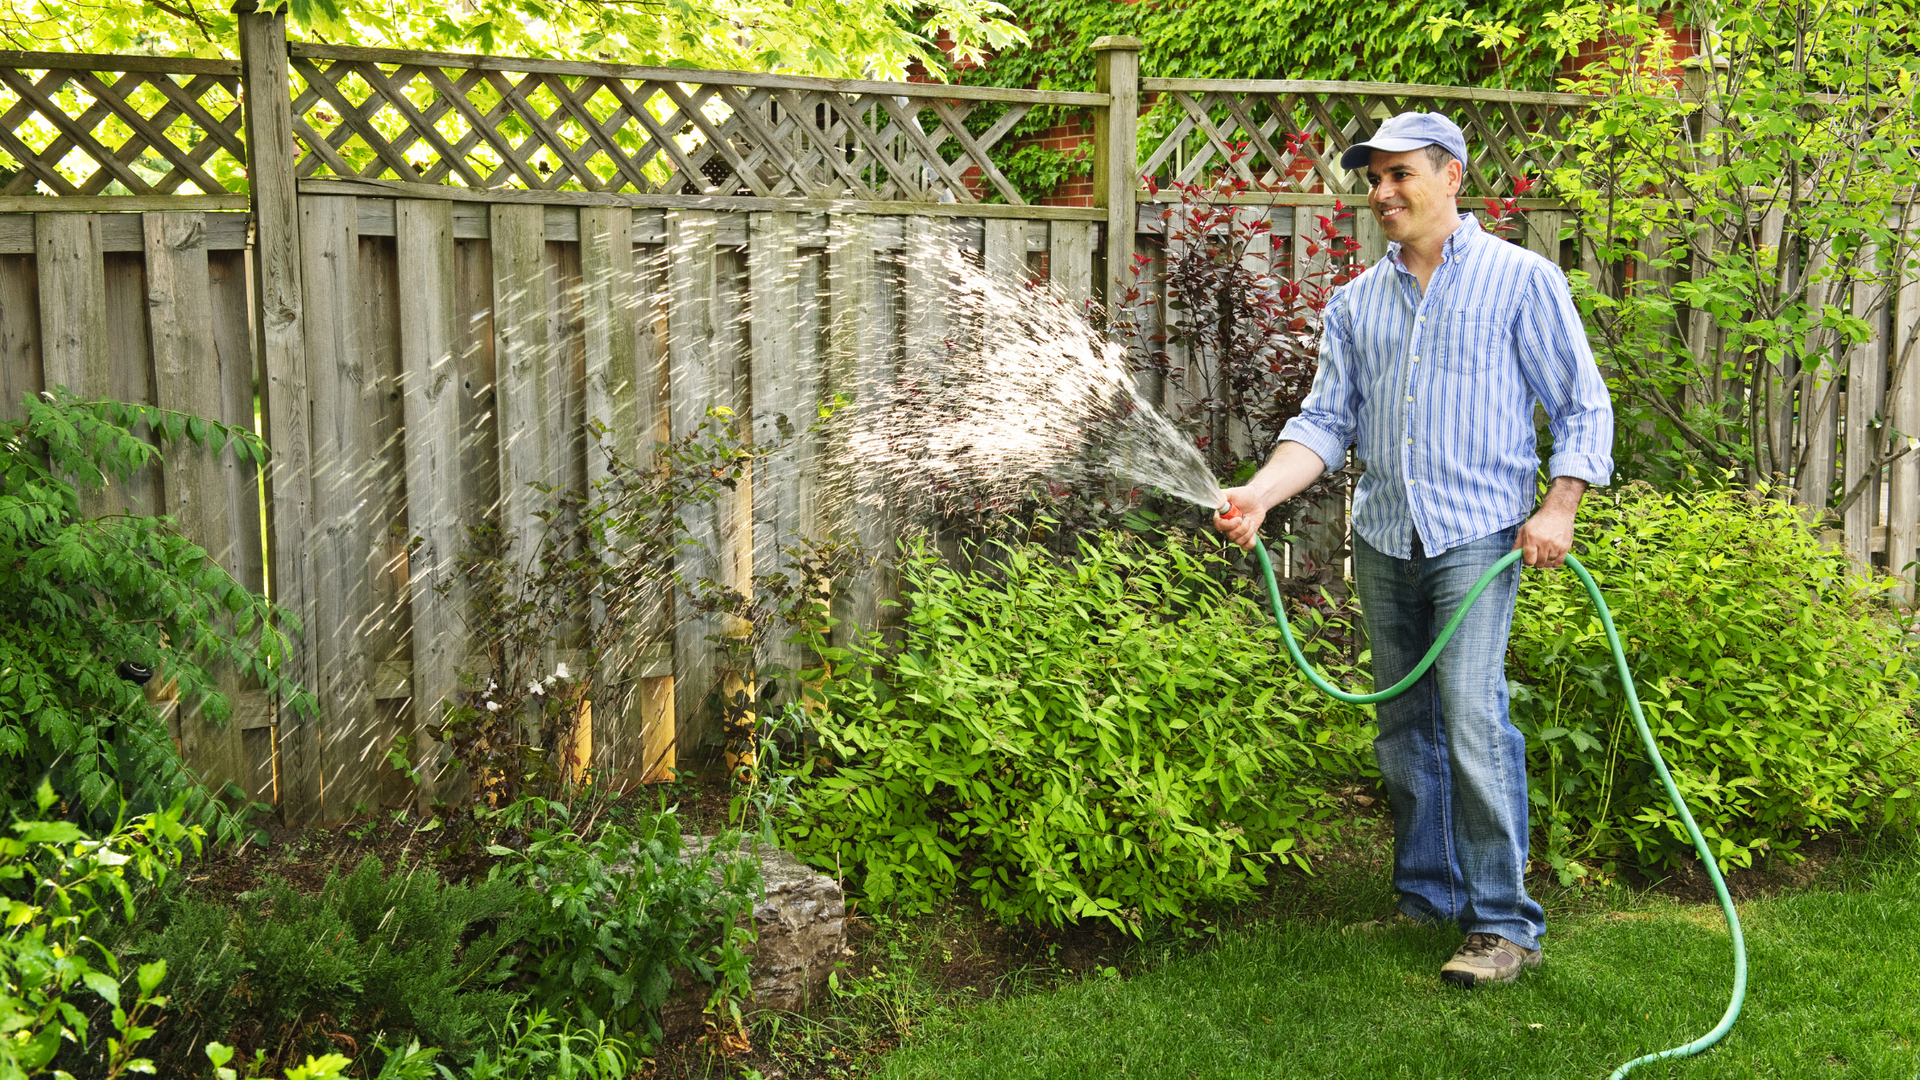 A person watering plants in a well-maintained garden.